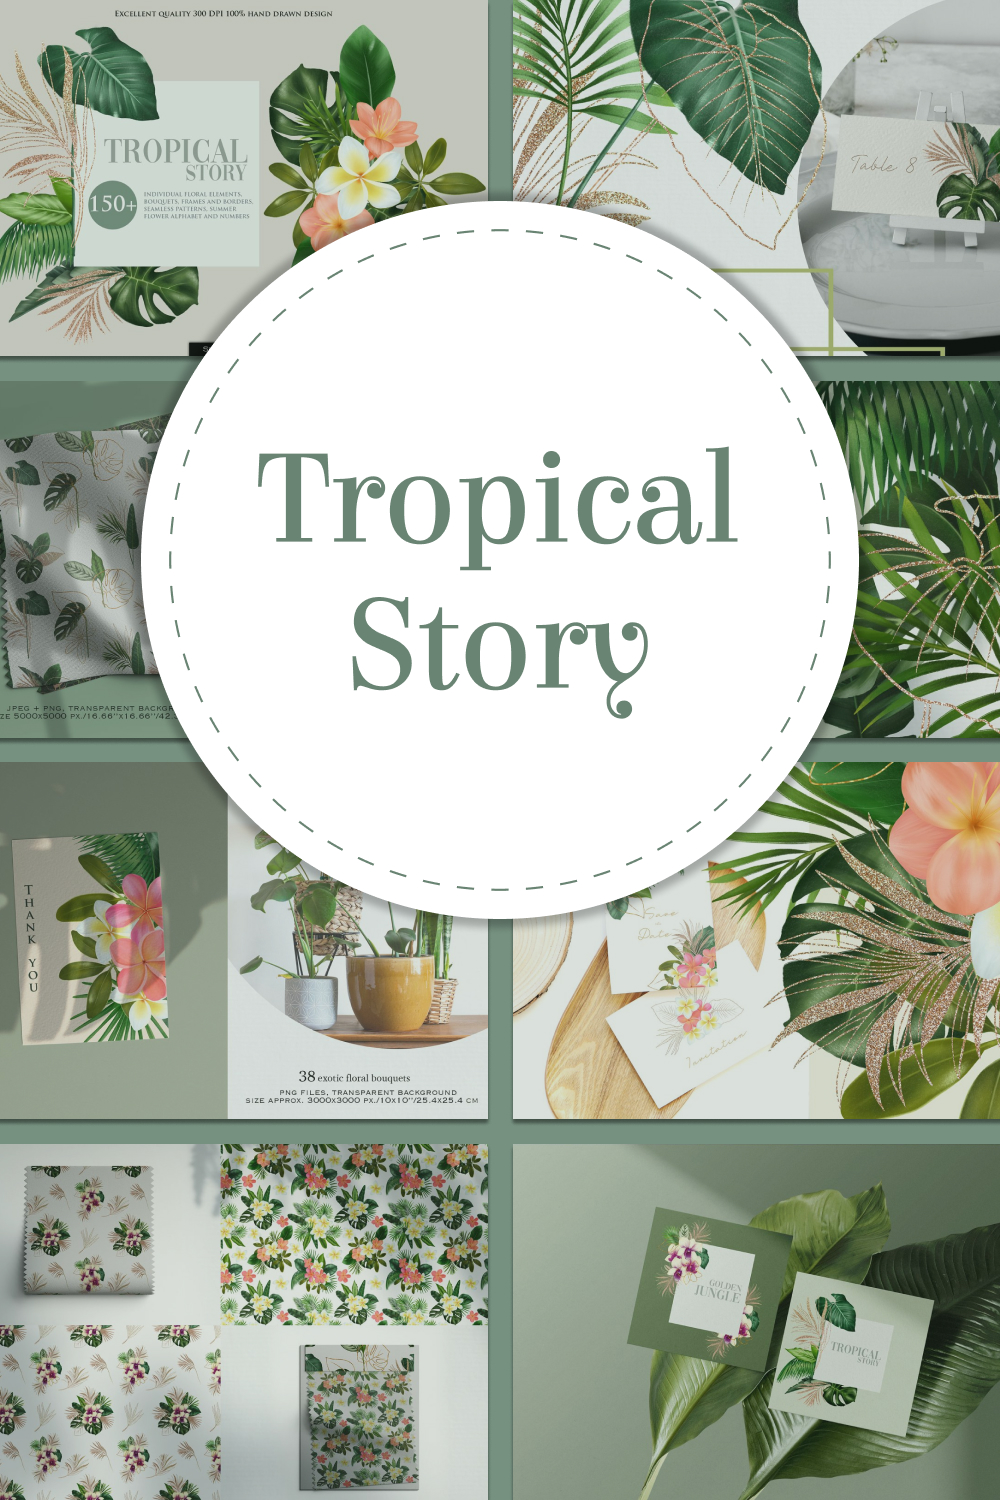 Tropical story of pinterest.